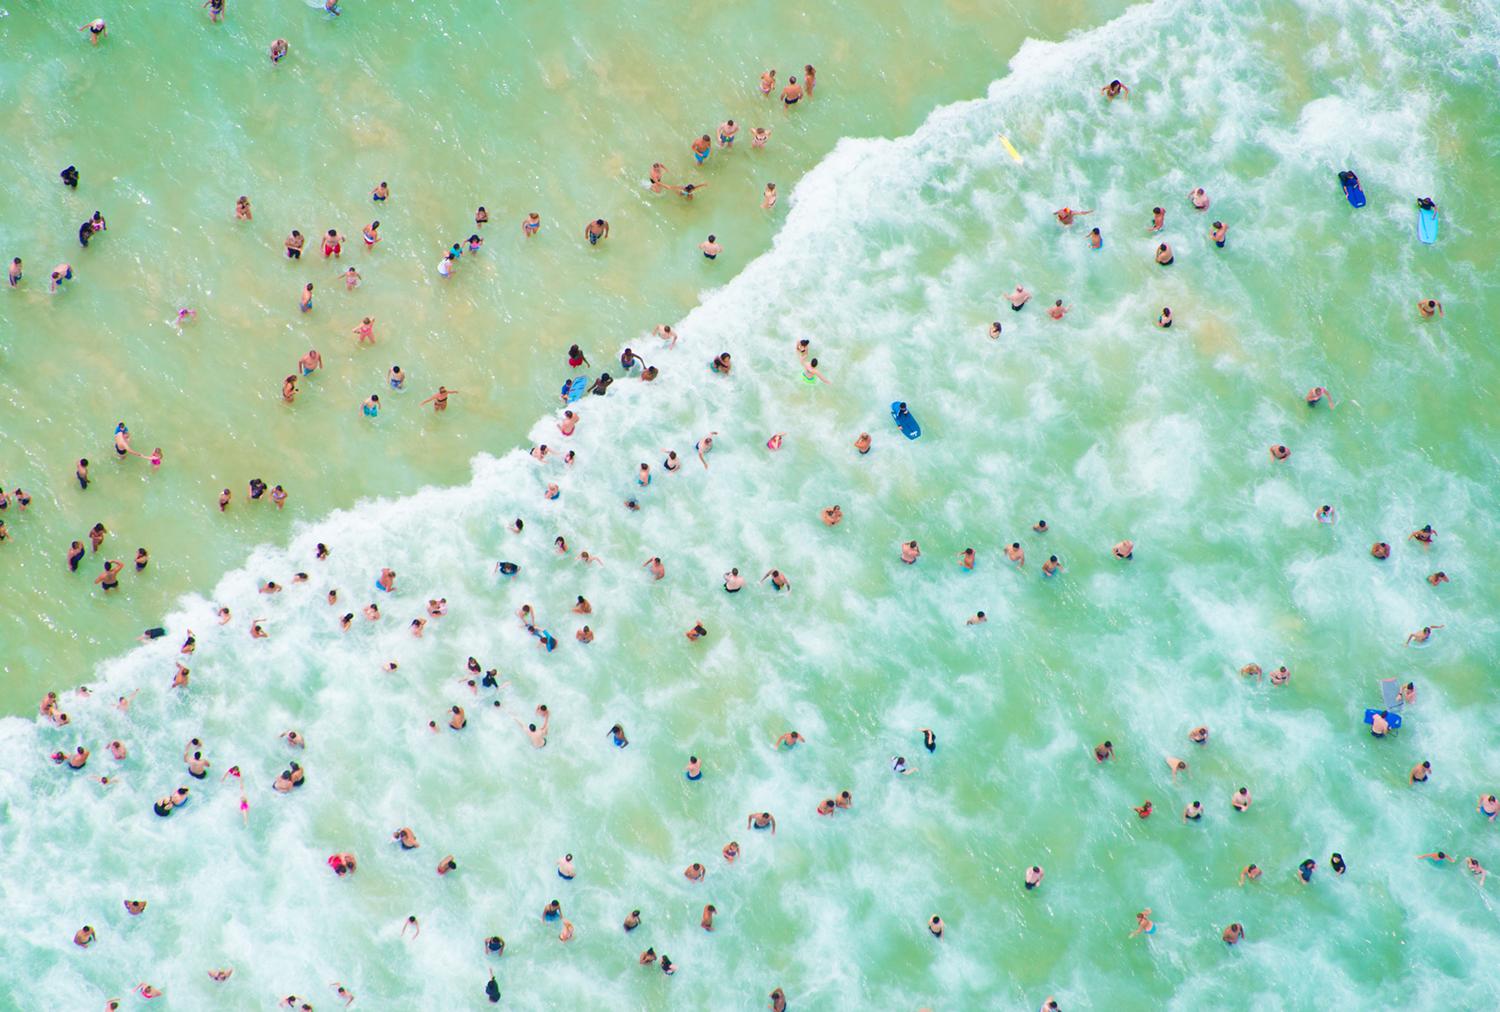 Gray Malin S Photography Captures Aerial Of The World